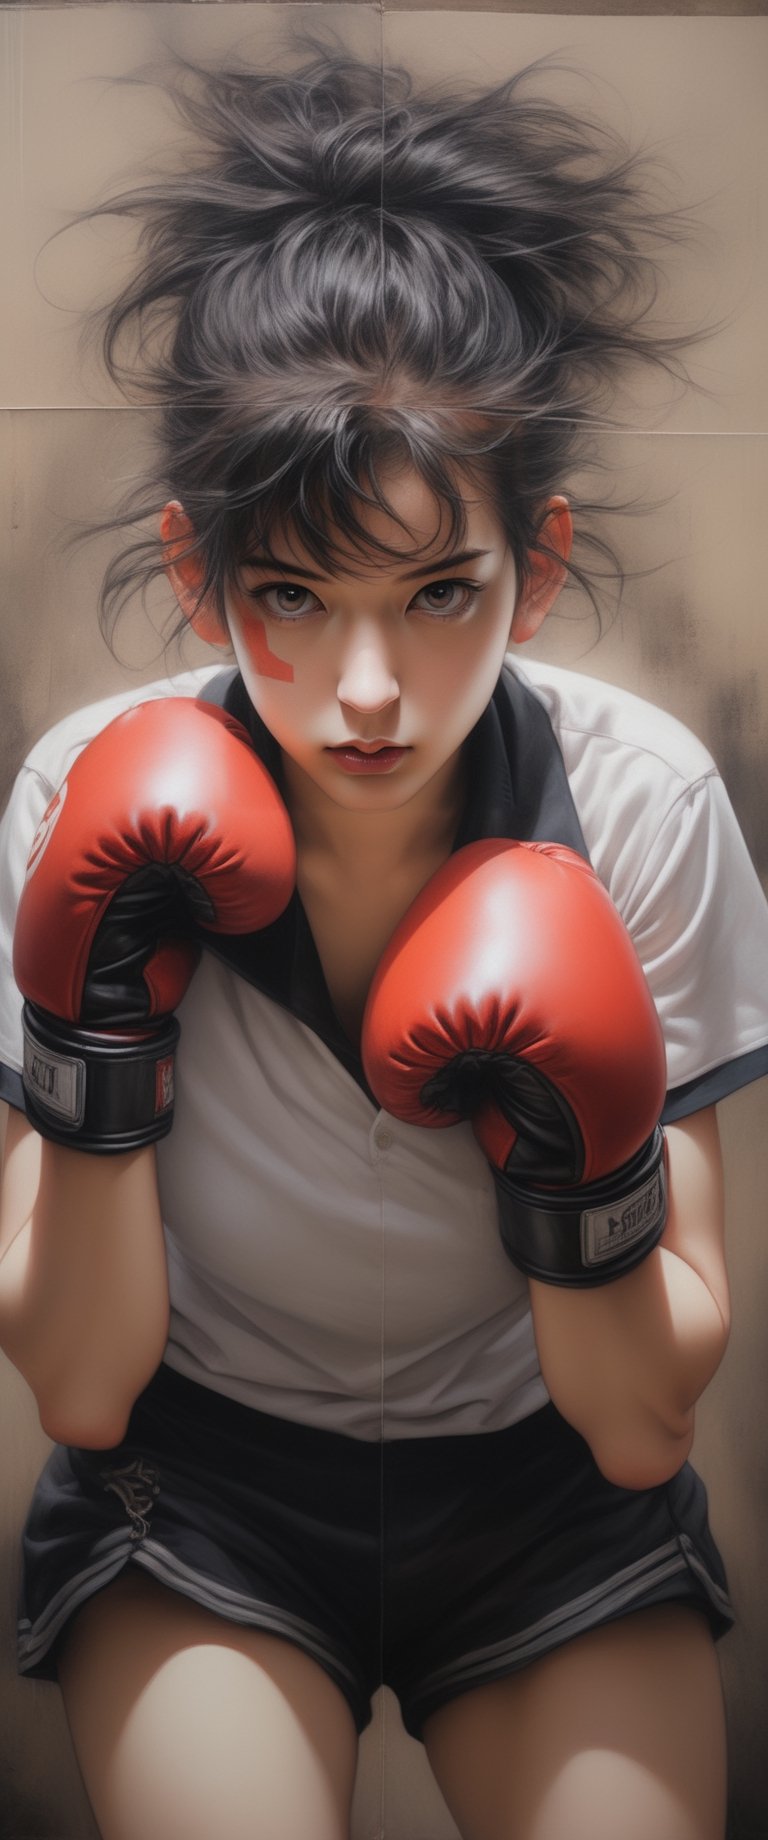 hyper realistic, photo realistic, (close up), comic style, , dark spring, dark kawaii, in a polo biker shorts, ((wearing large boxing gloves)), ,  triple exposure, perfect fingers, perfect body, japanese ink, immaculate composition, dynamic pose, brian viveros, katsuya terada, esao andrews, anne stokes, dynamic pose, dynamic light and shadow, hyperrealism,ct-jeniiii,sooyaaa, ct-fujiii